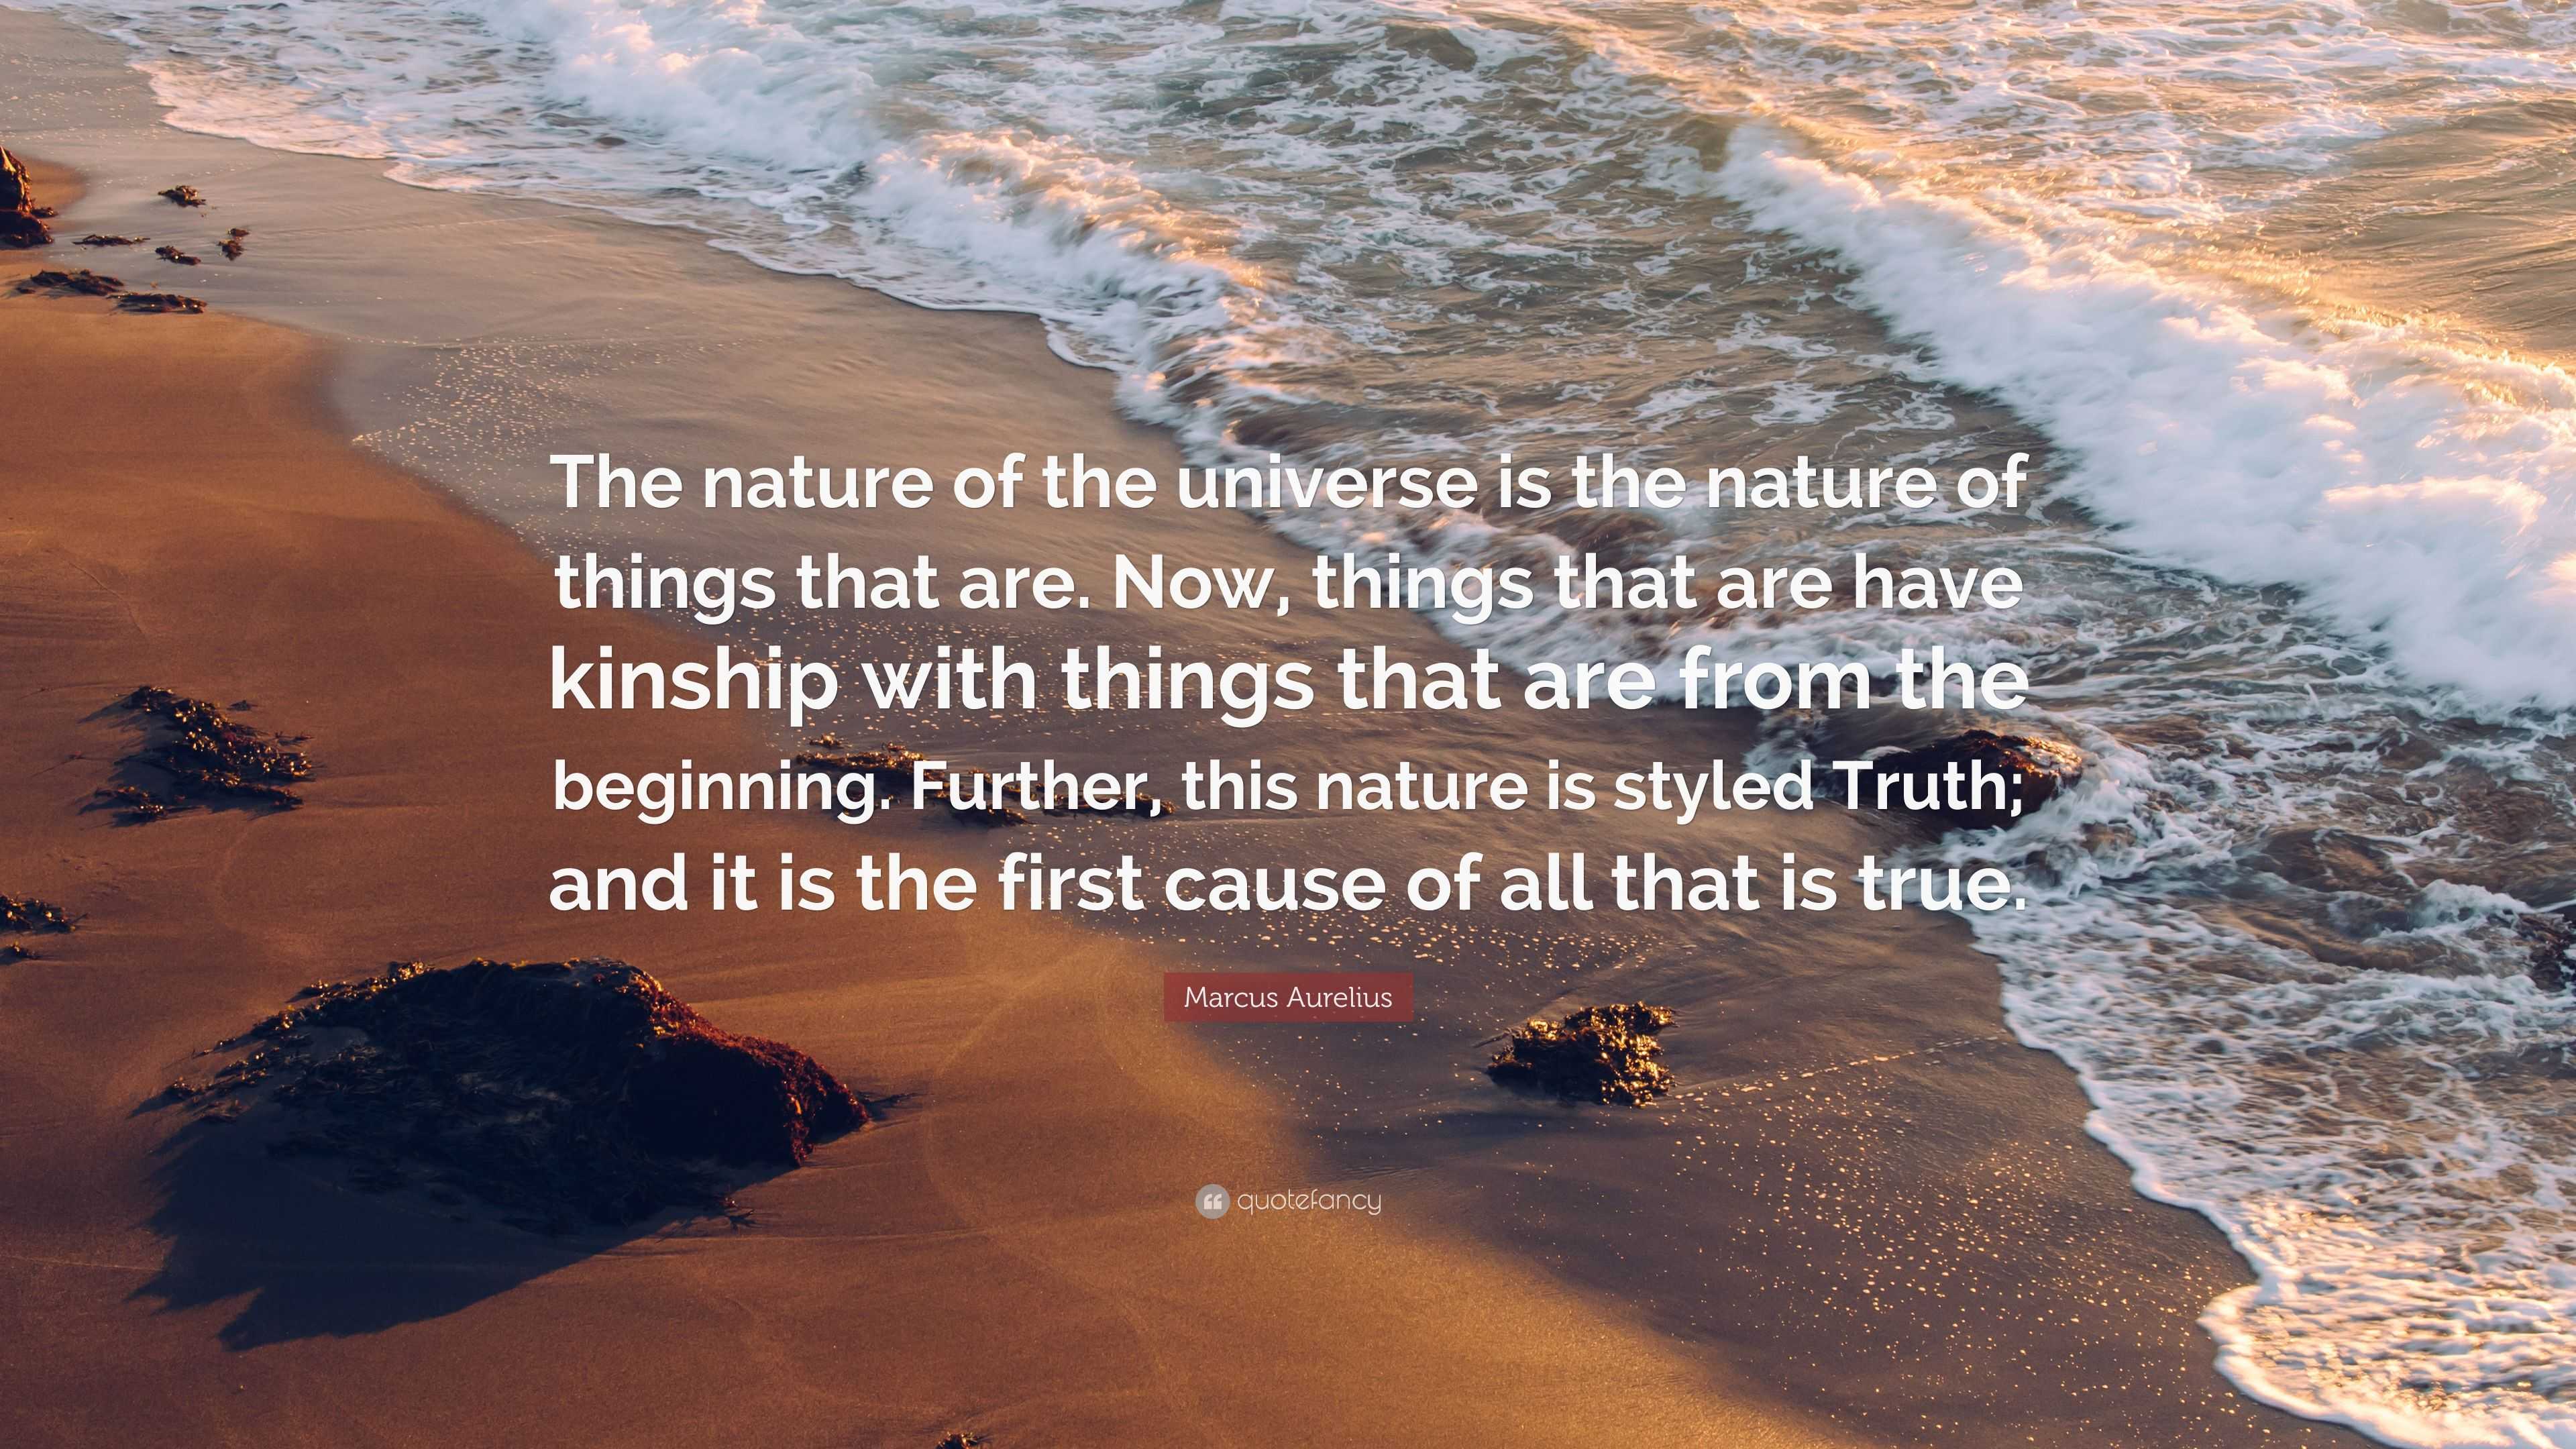 Marcus Aurelius Quote: “The nature of the universe is the nature of ...